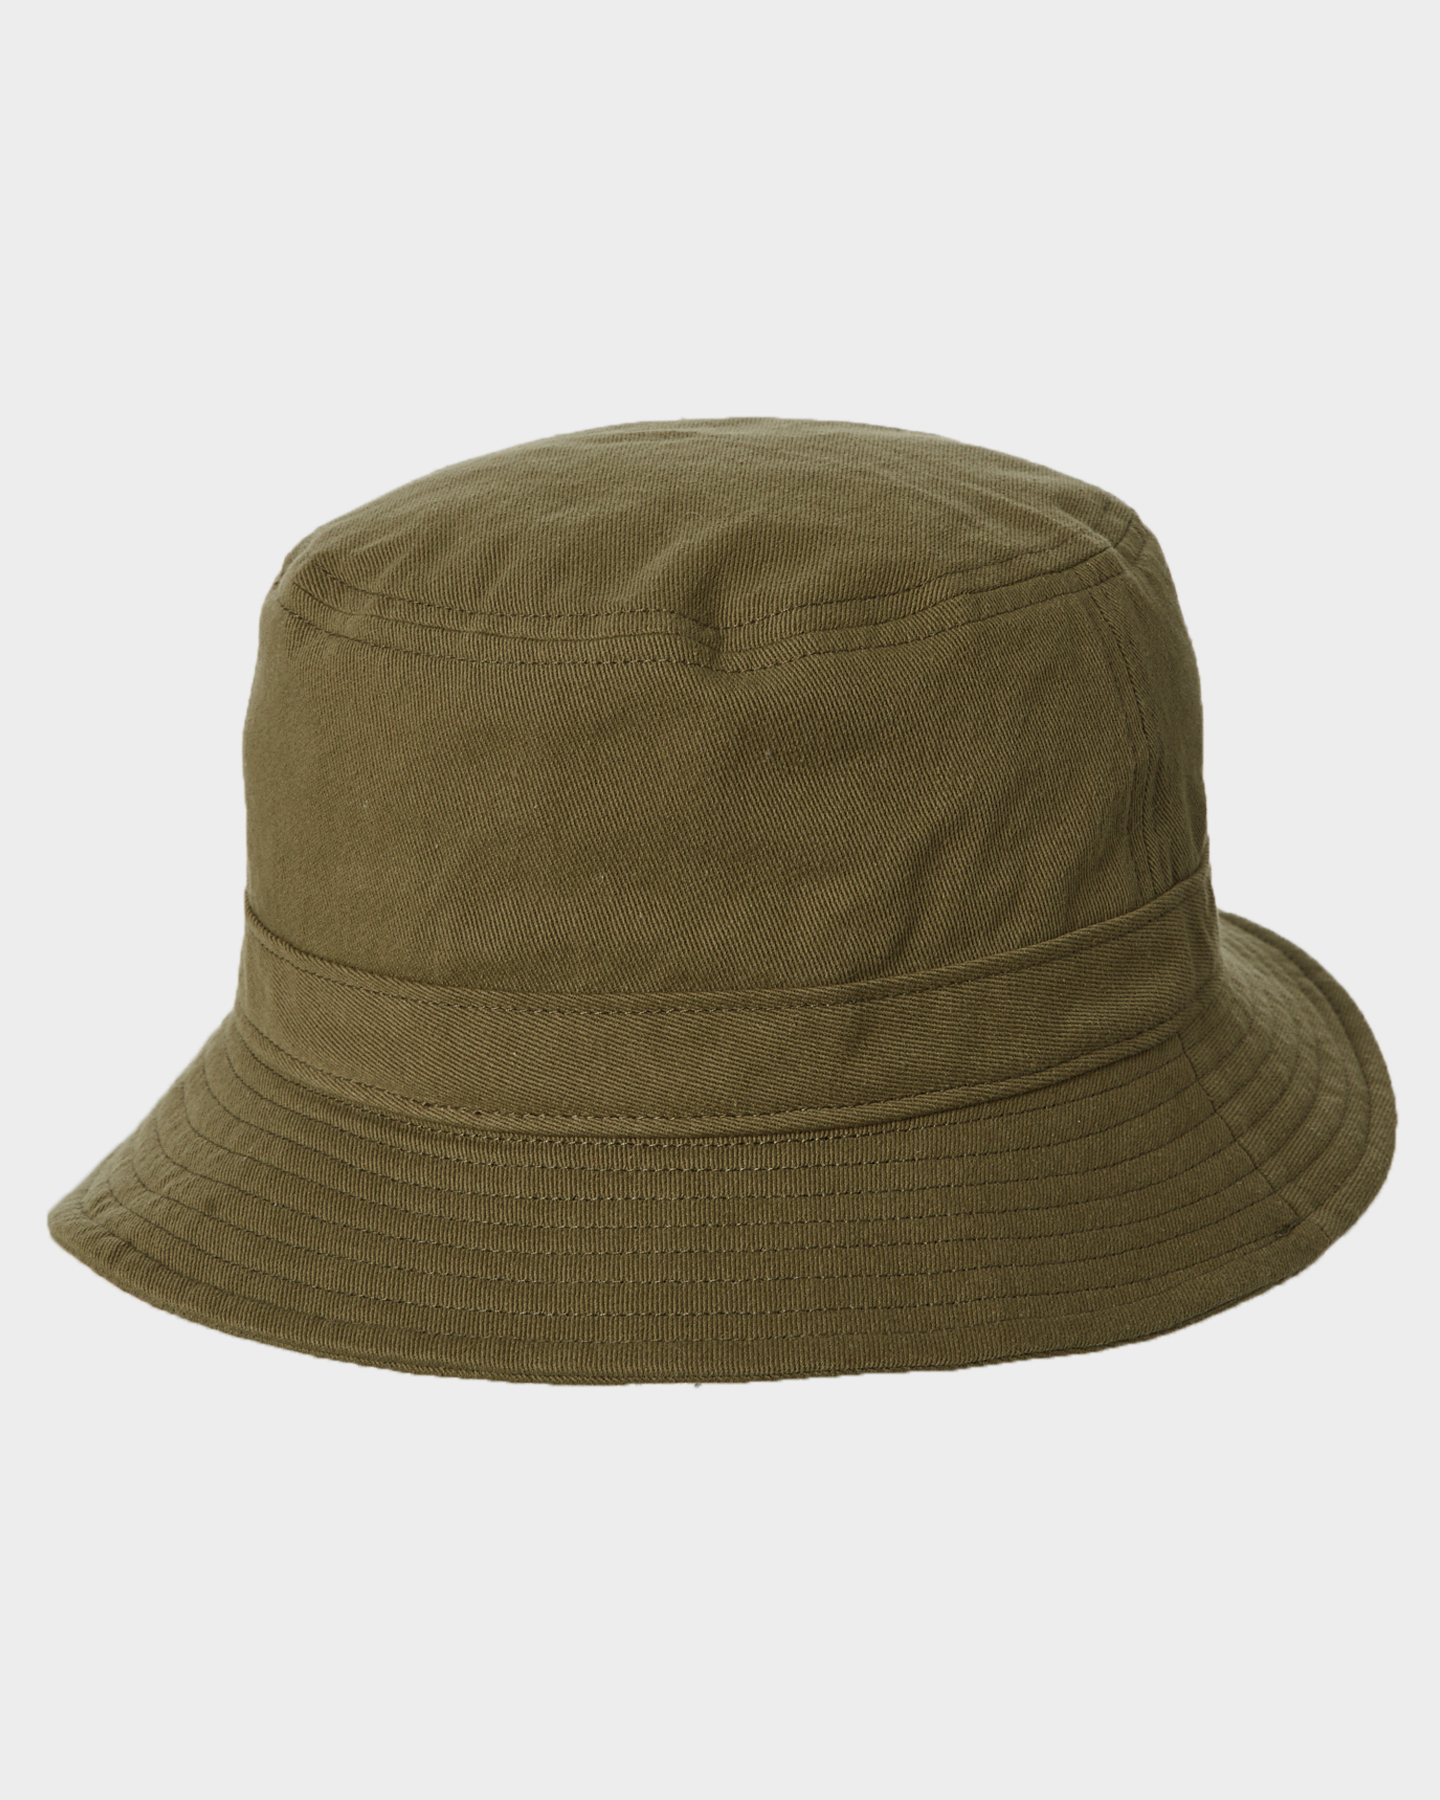 Brixton Beta Packable Bucket Hat - Military Olive | SurfStitch